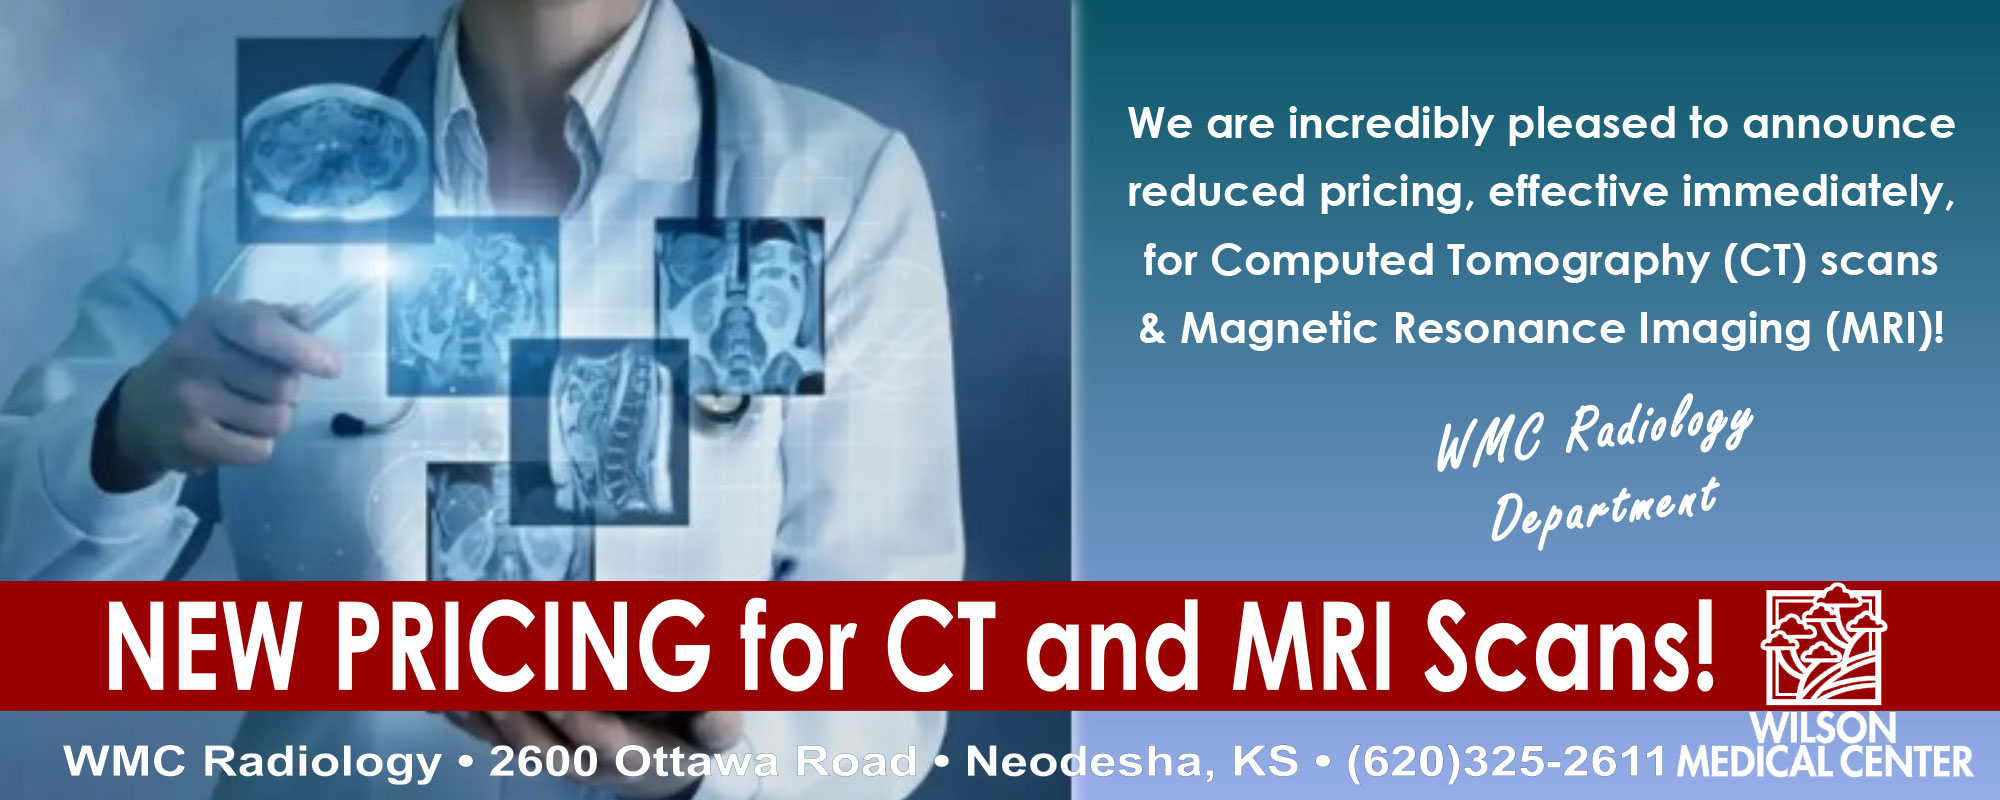 We are incredibly pleased to announce reduced pricing, effective immediately, for Computed Tomography (CT) scans & Magnetic Resonance Imaging (MRI) !
WMC Radiology Department

NEW PRICING for CT and MRI Scans!
-WMC Radiology 
* 2600 Ottawa Road * Neodesha, KS * (620)325-2611
Wilson Medical Center